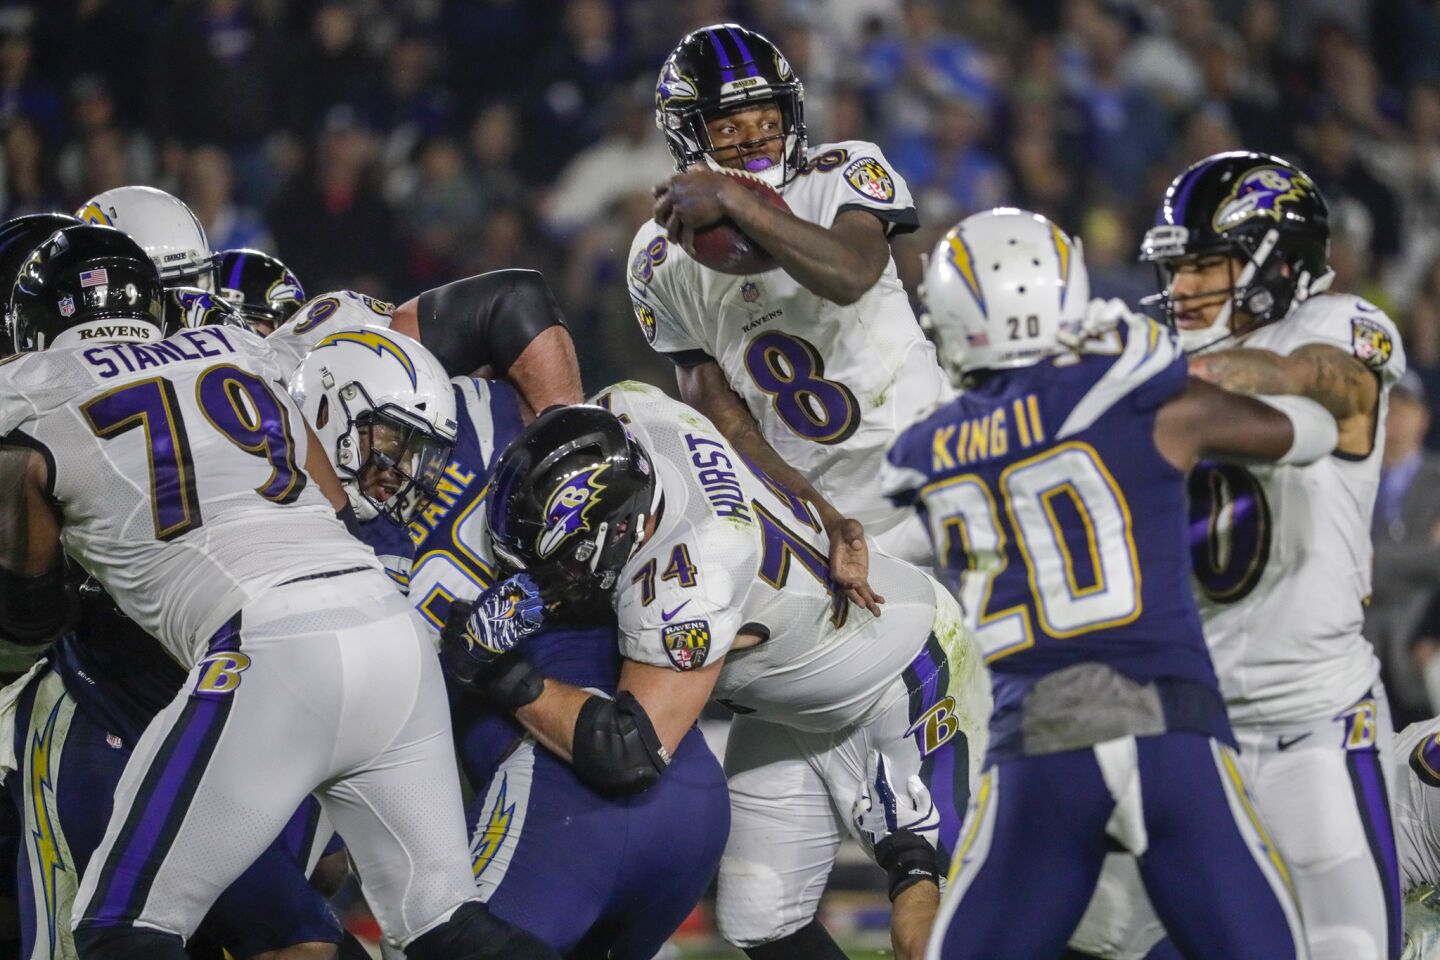 Ravens quarterback Lamar Jackson looks for the first down marker as he jumps over the pile, gaining a first down on a fourth down play in the second quarter at StubHub Center.